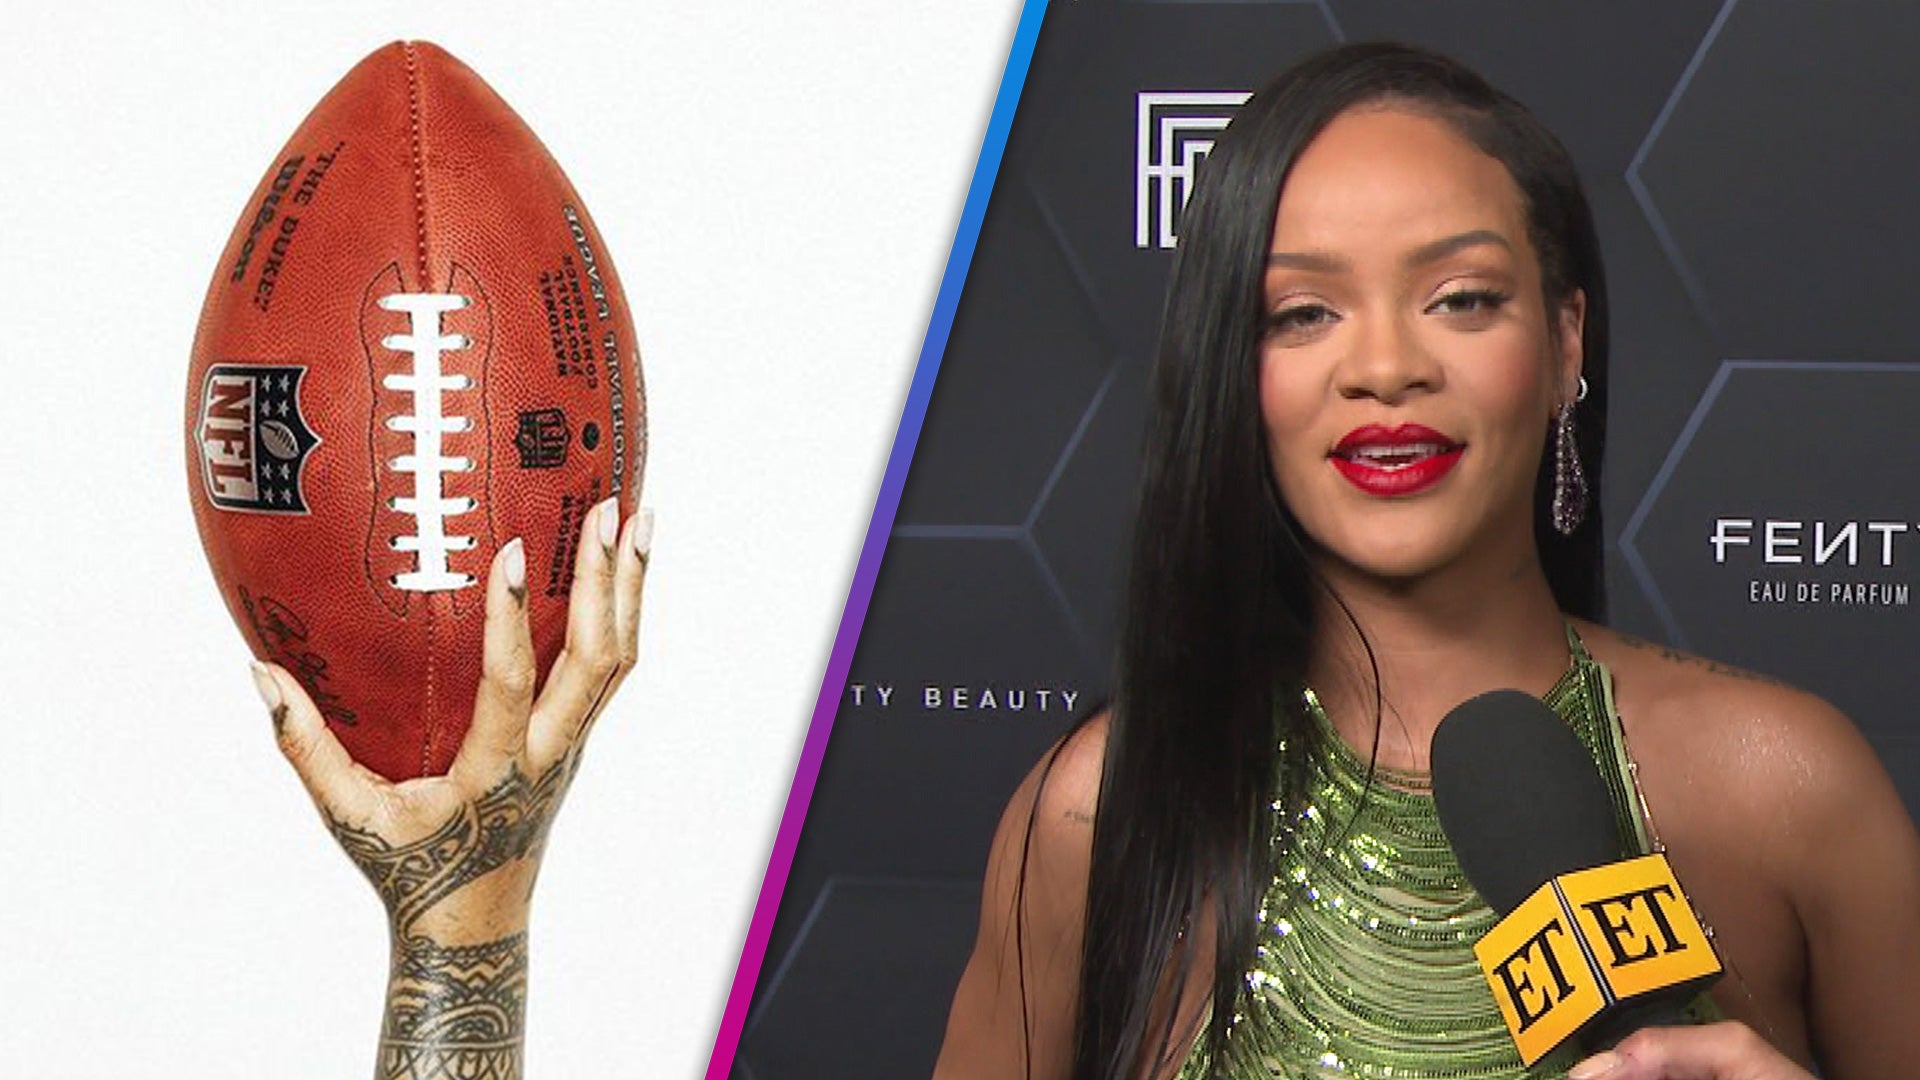 Rihanna Is Next Year's Super Bowl Halftime Show Performer